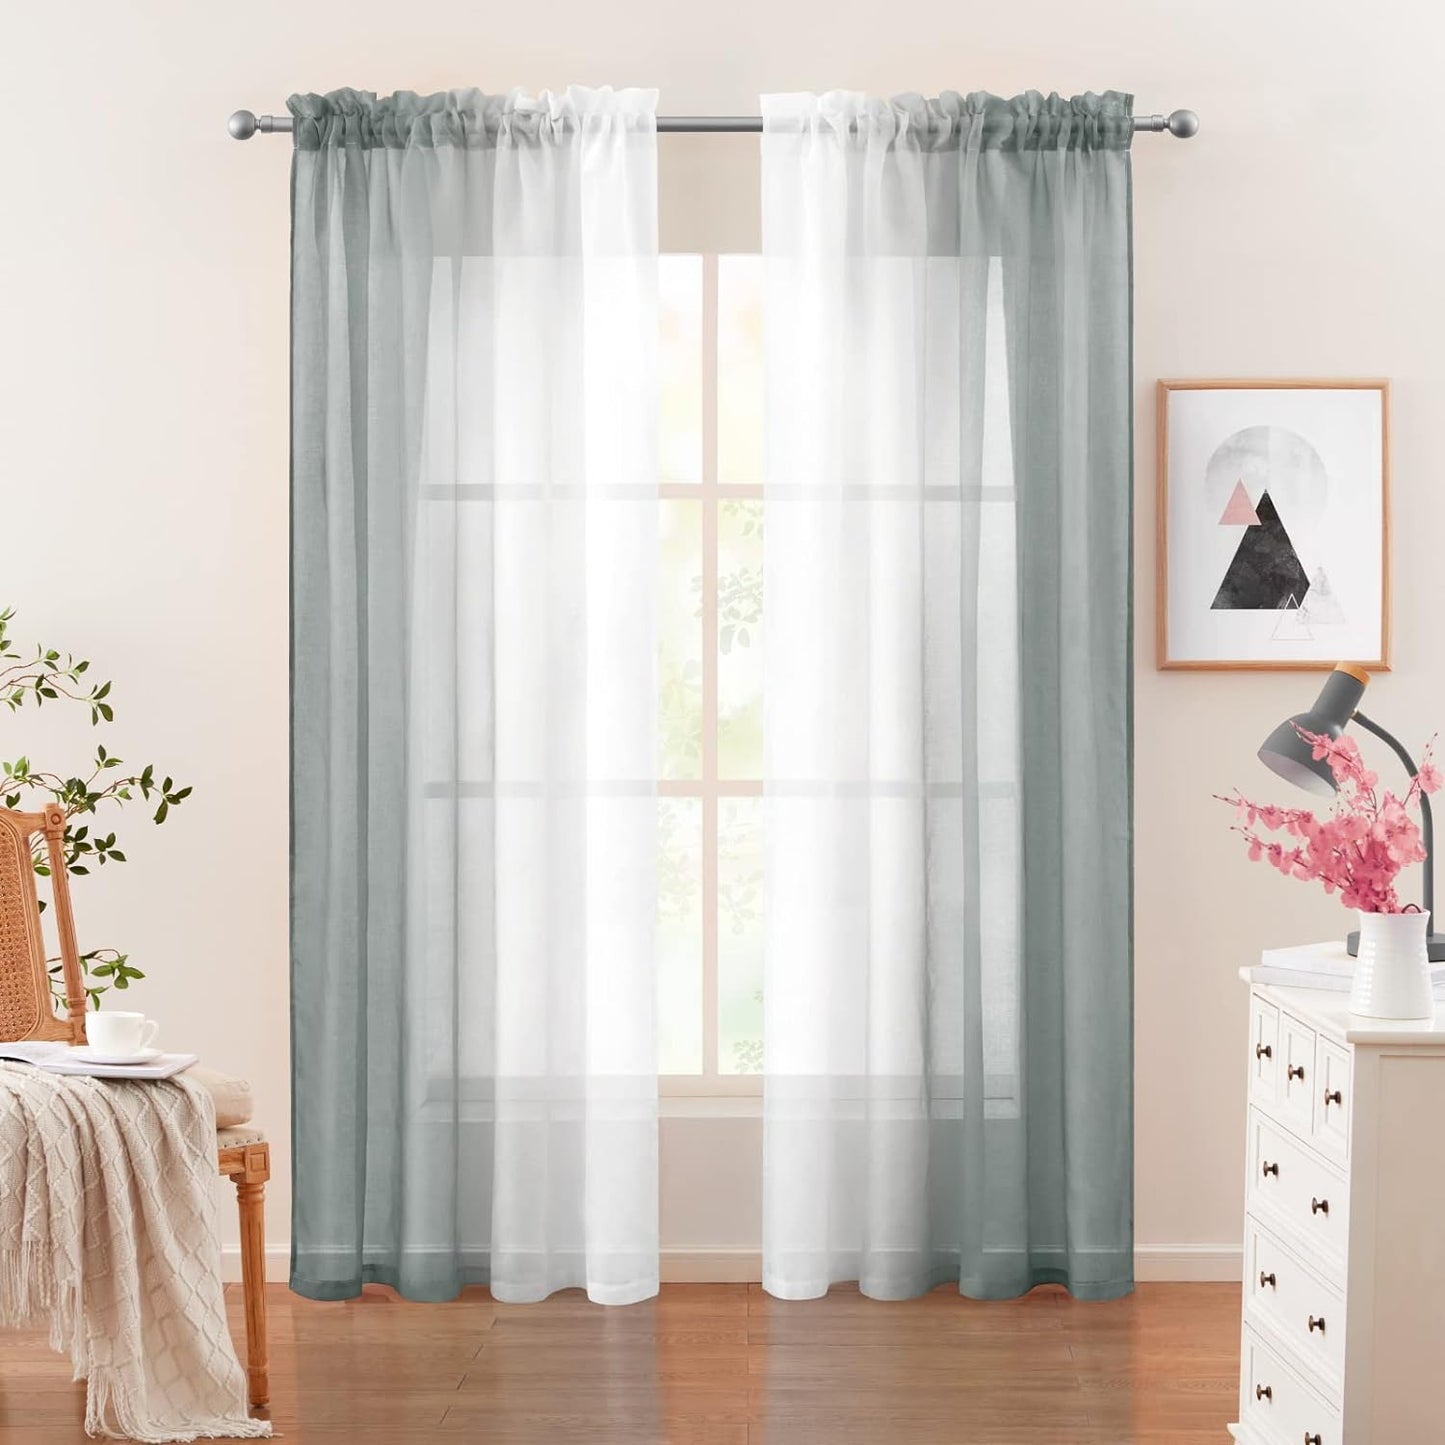 HOMEIDEAS 2 Panels Yellow and Grey Sheer Curtains for Girls Bedroom 52 X 84 Inch, Ombre Linen Curtains Rod Pocket Drapes for Nursery Kids Window and Living Room  HOMEIDEAS Grey And White 52"W X 84"L 